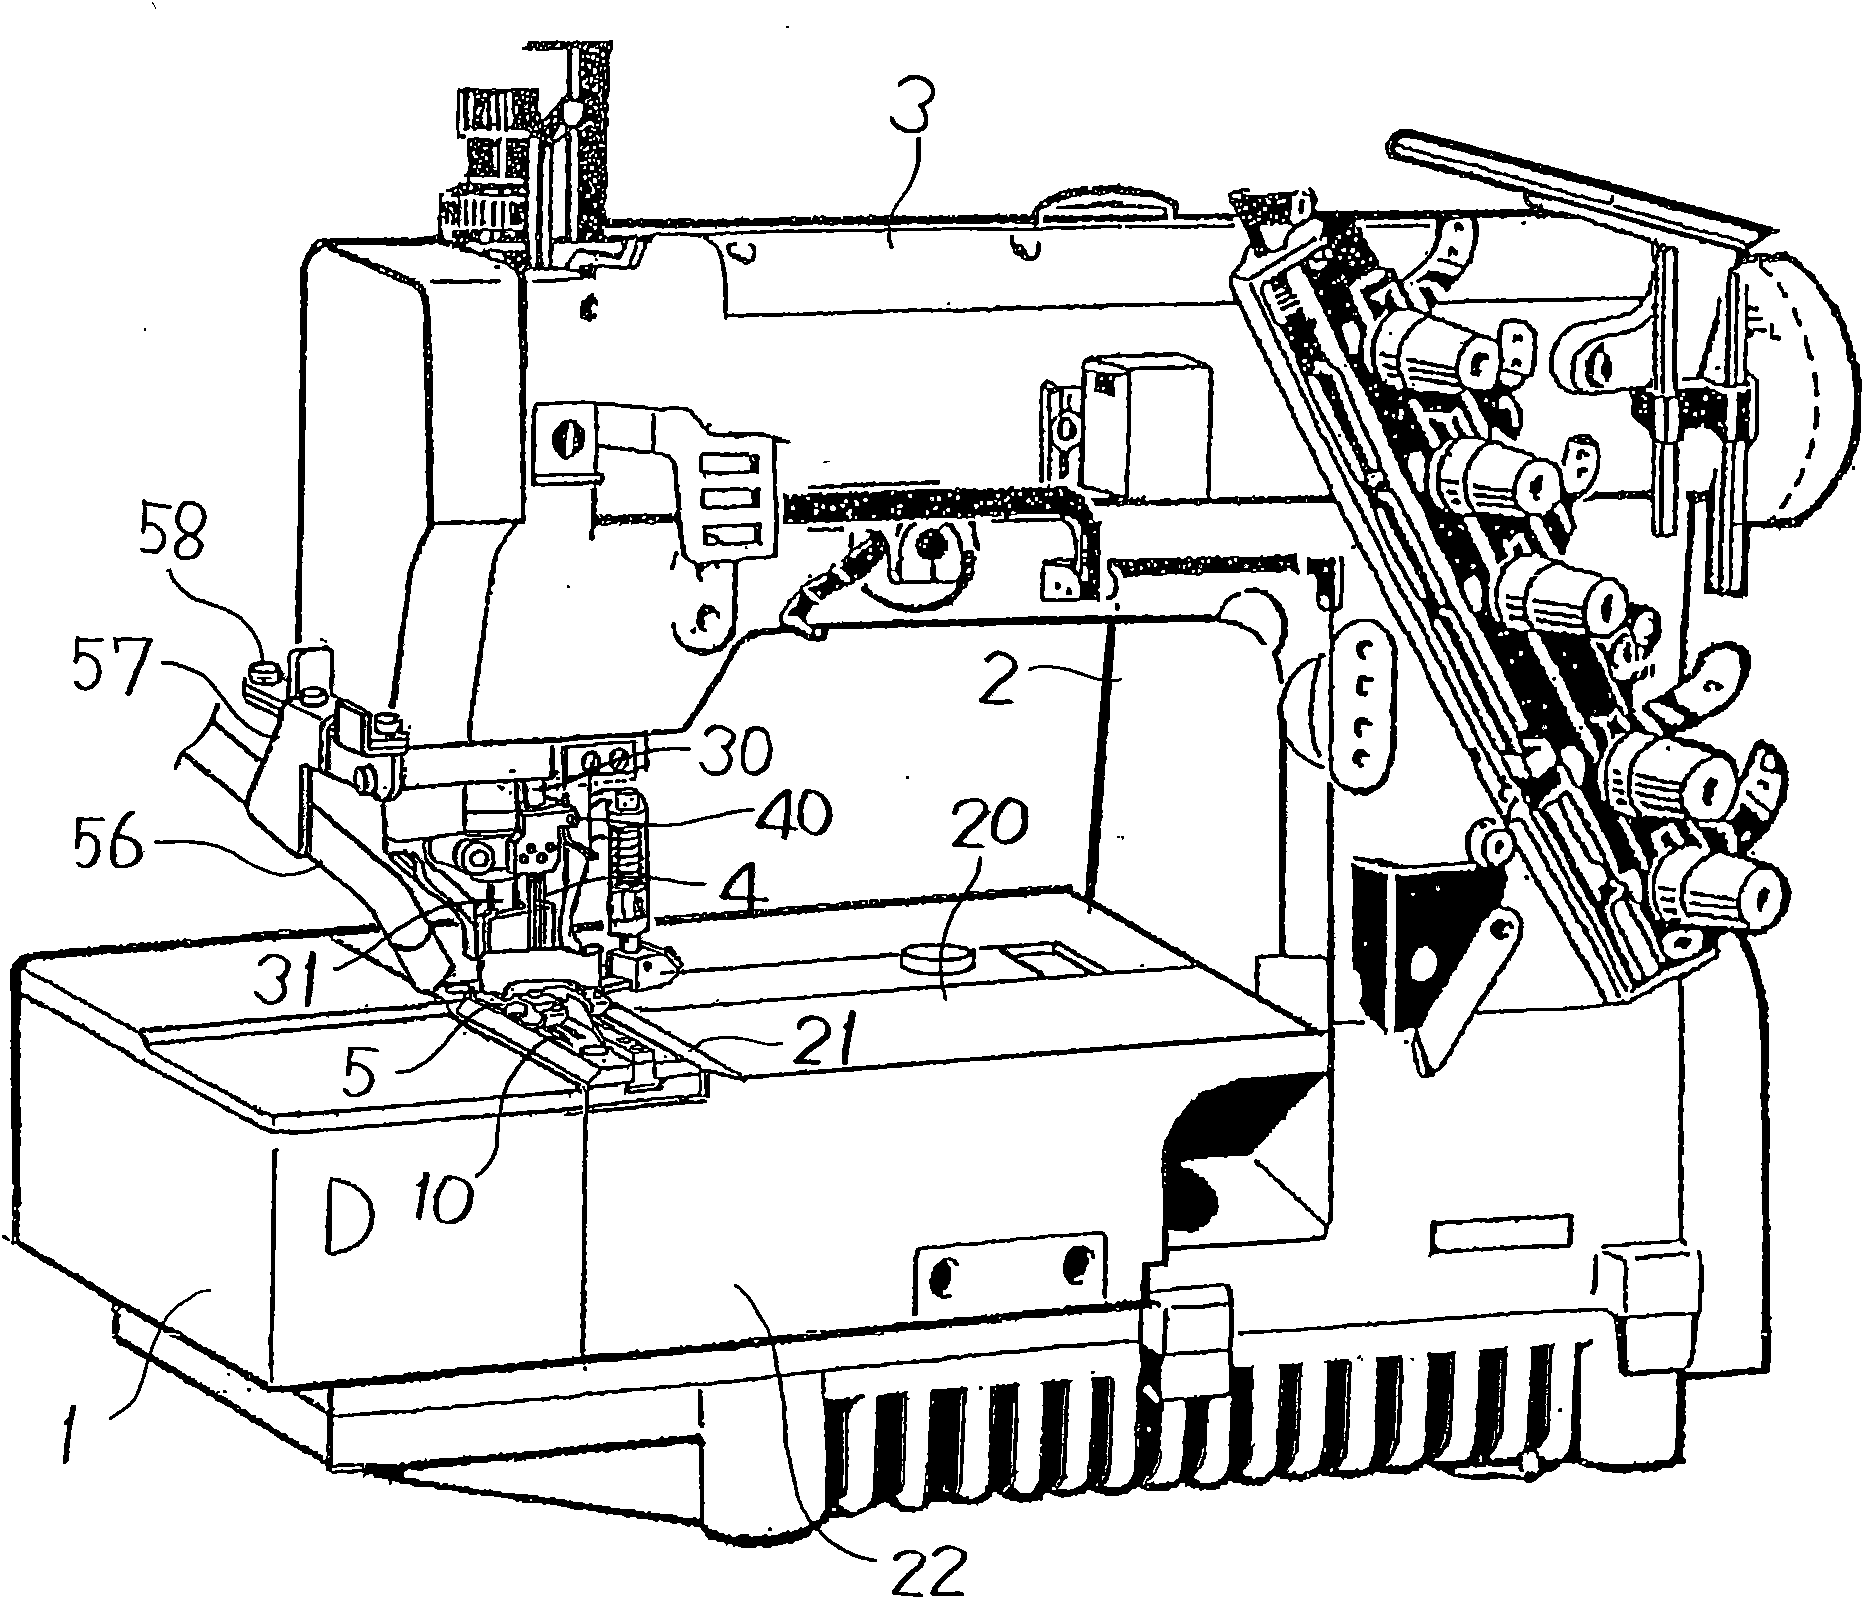 Double-chain stitch sewing machine having box-shaped bed